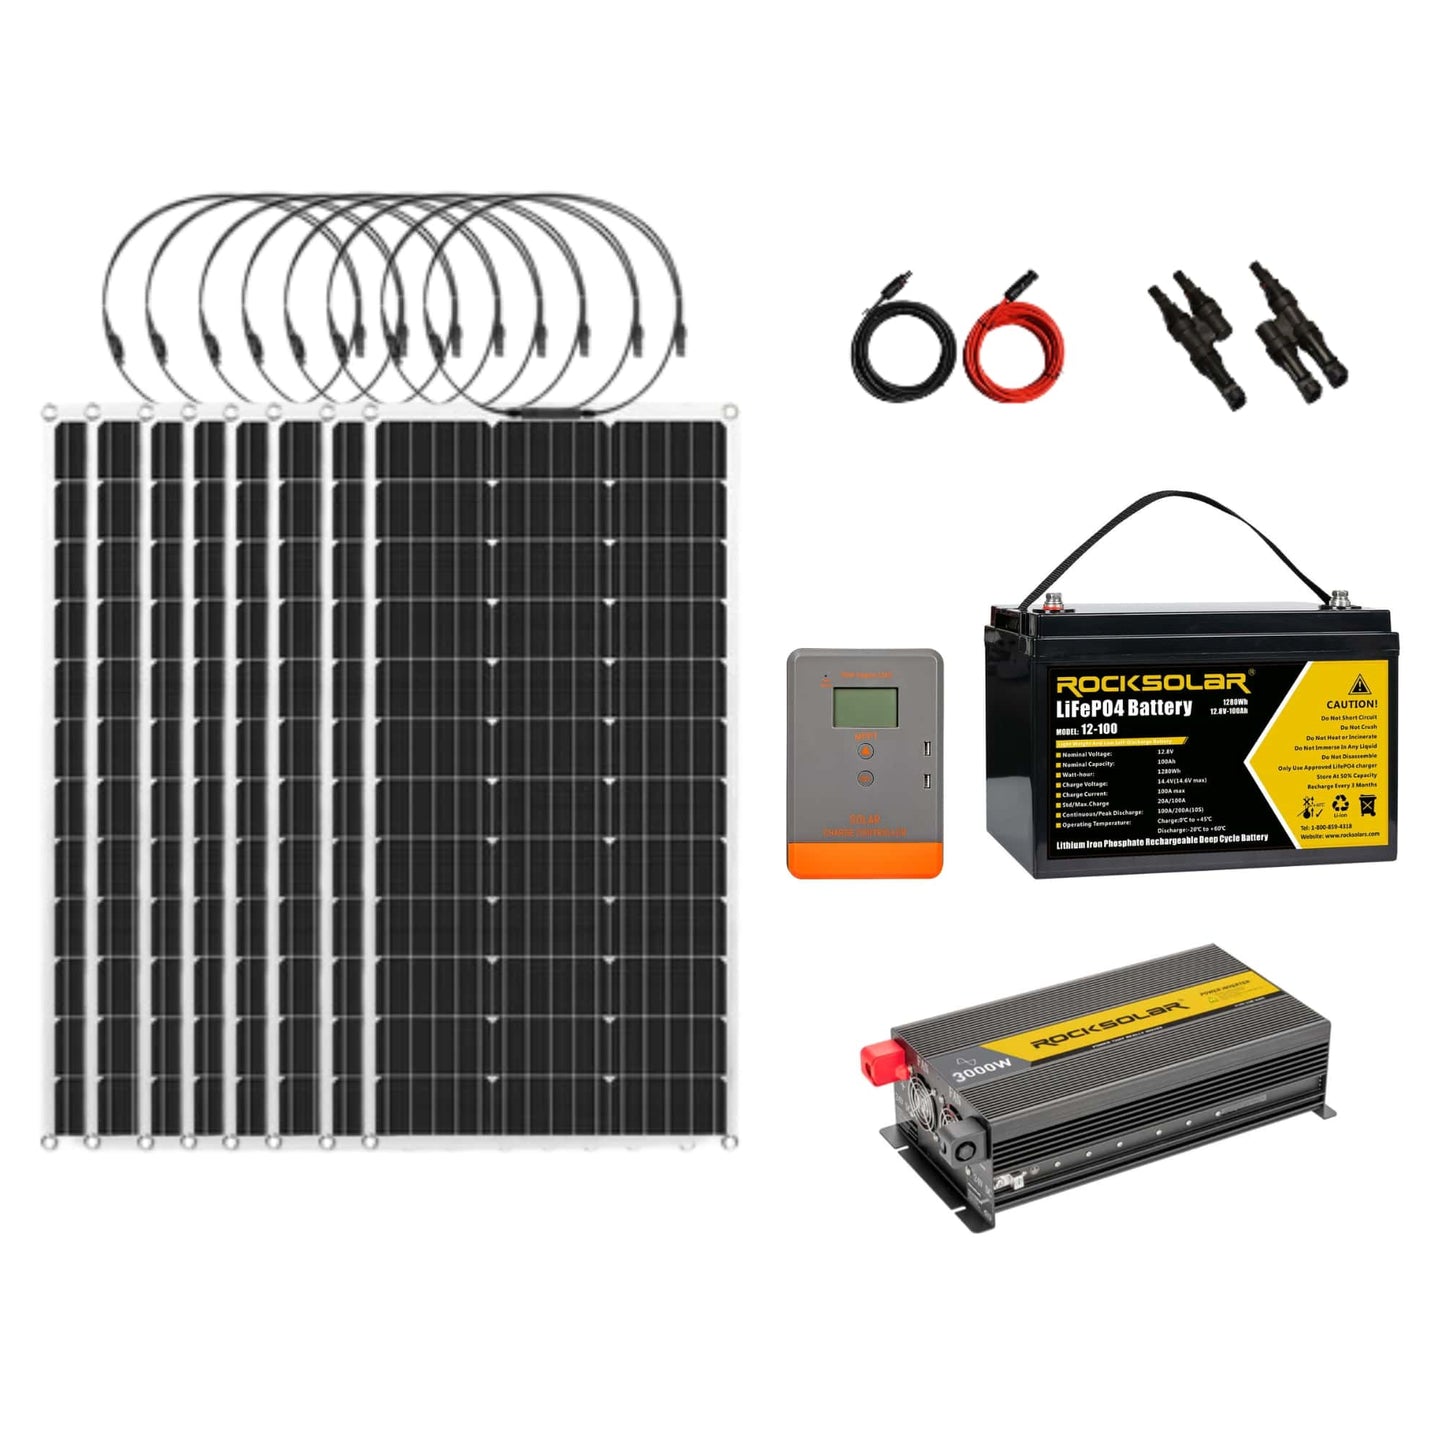 power-your-boat-with-sail-away-solar-panel-kit-rocksolar-ca